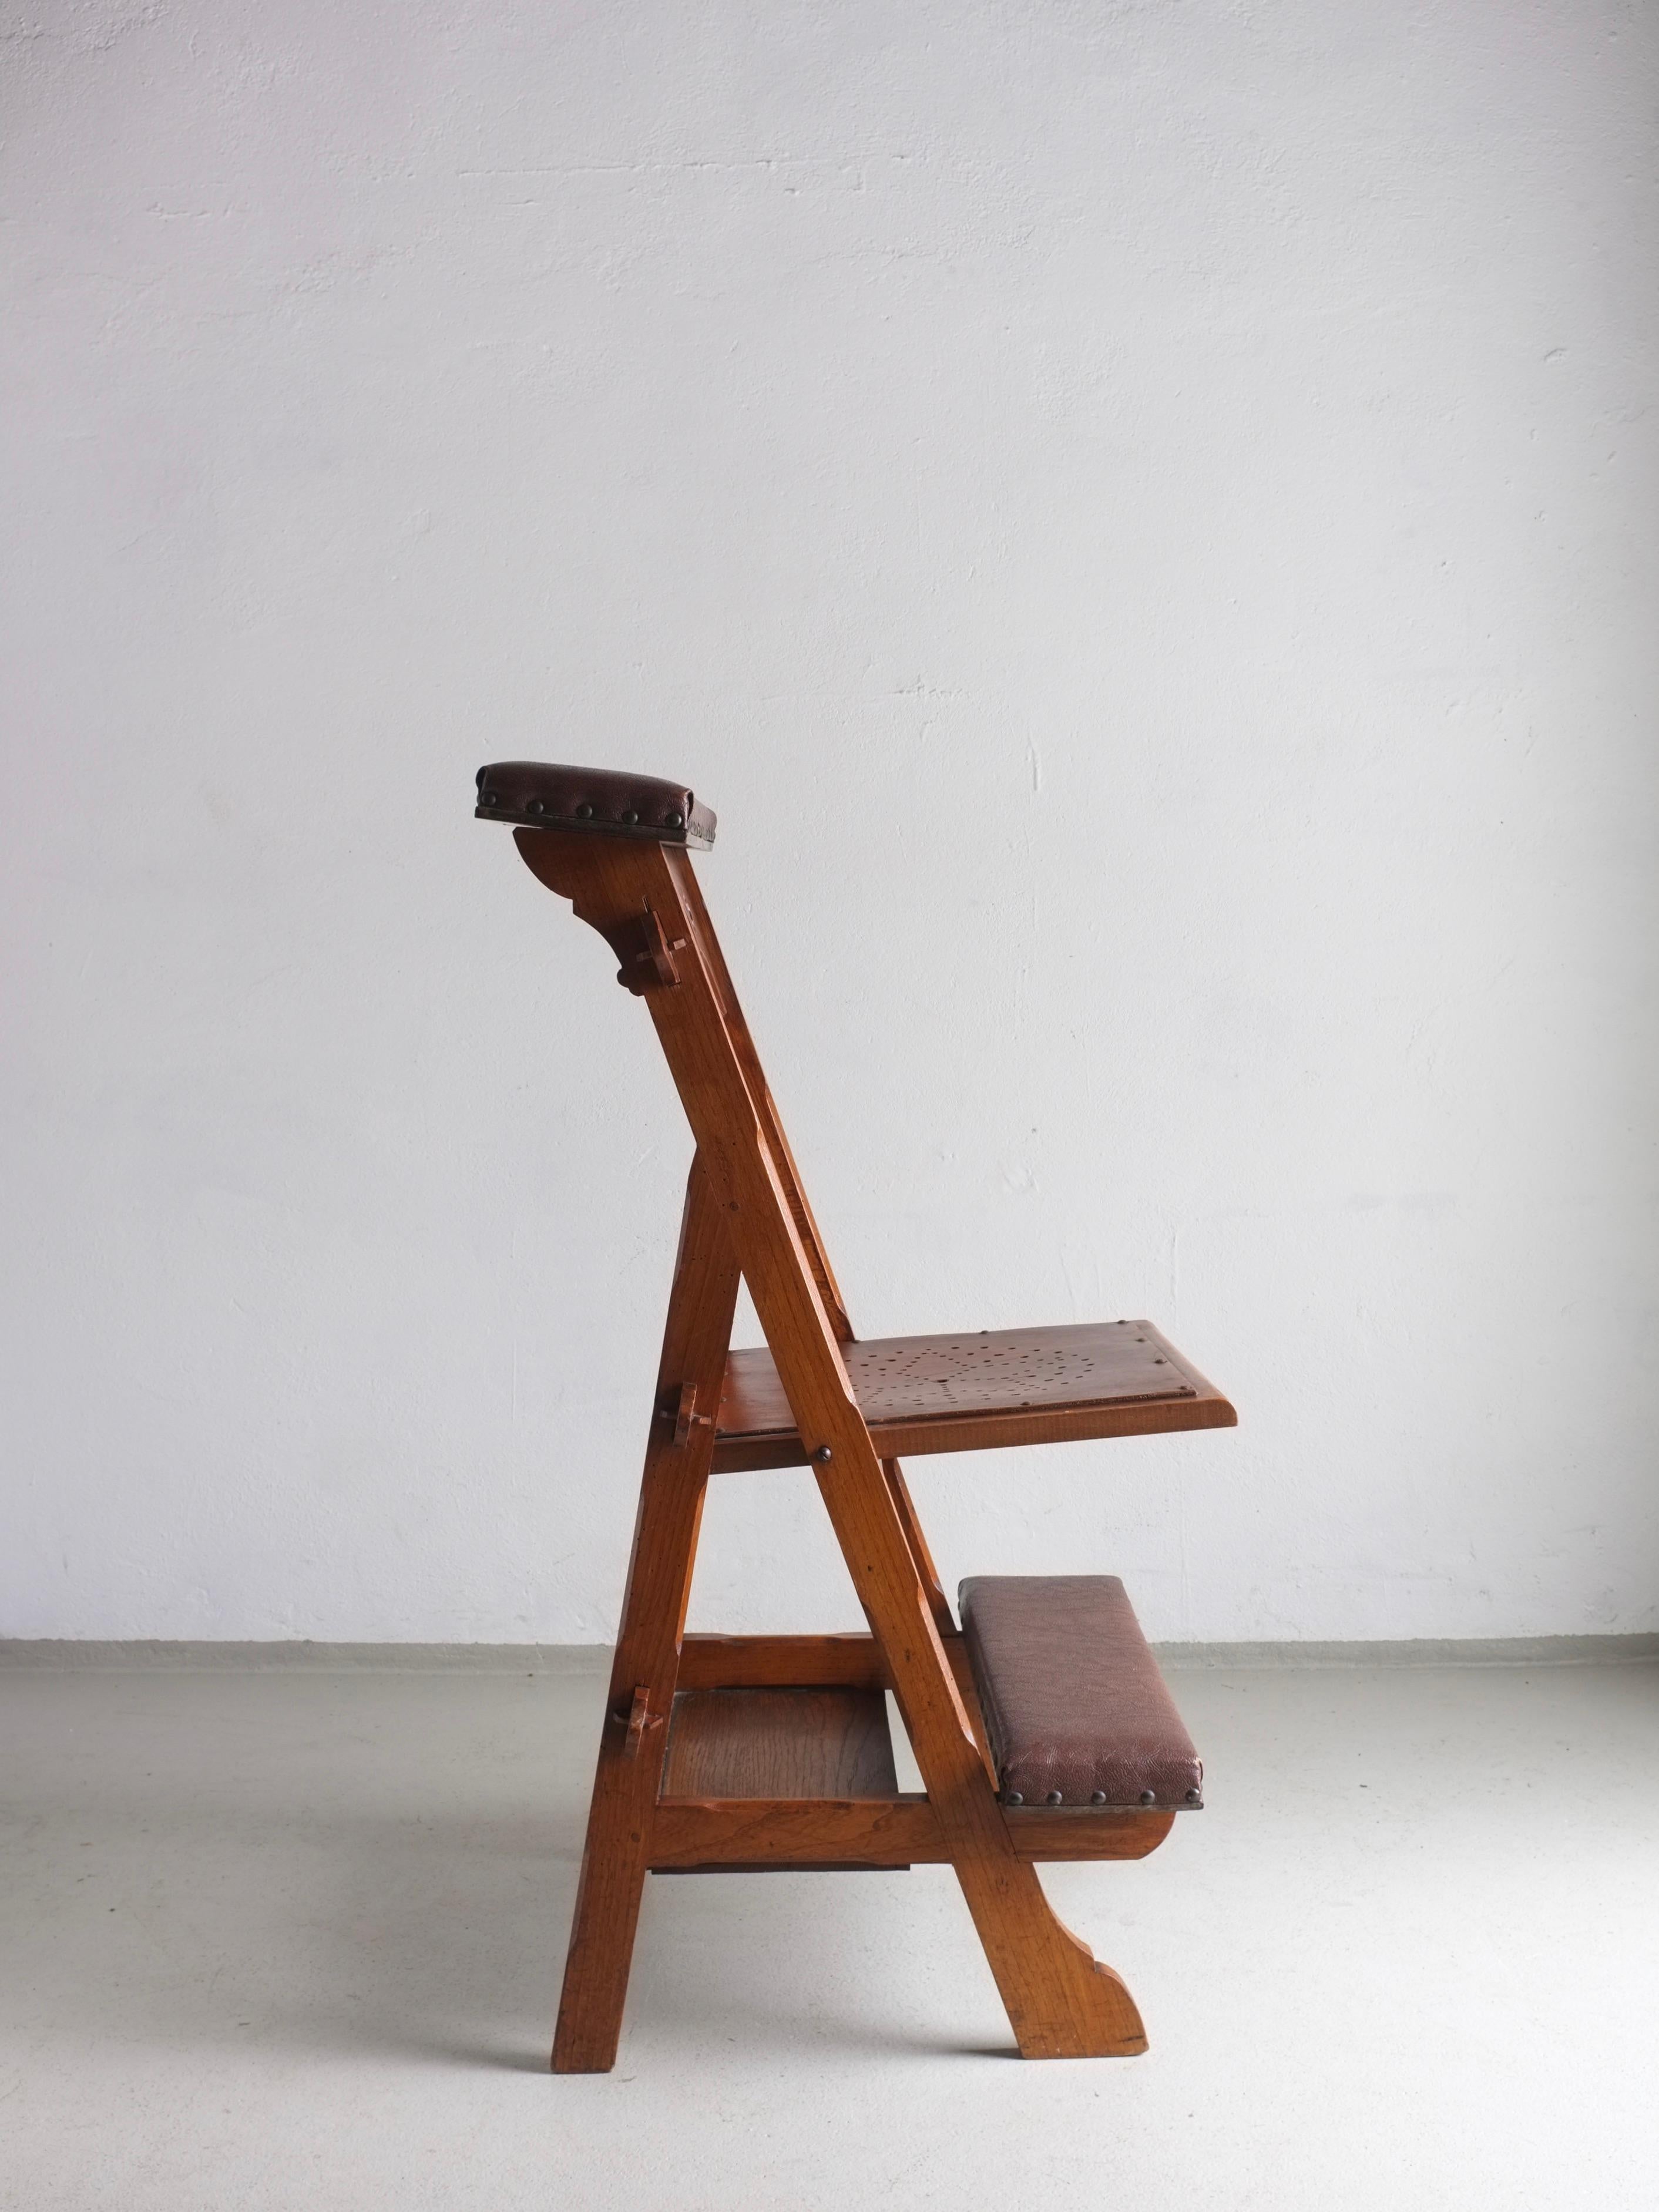 Rustic Carved Wood Folding Chair with Shelf, Netherlands, 1950s